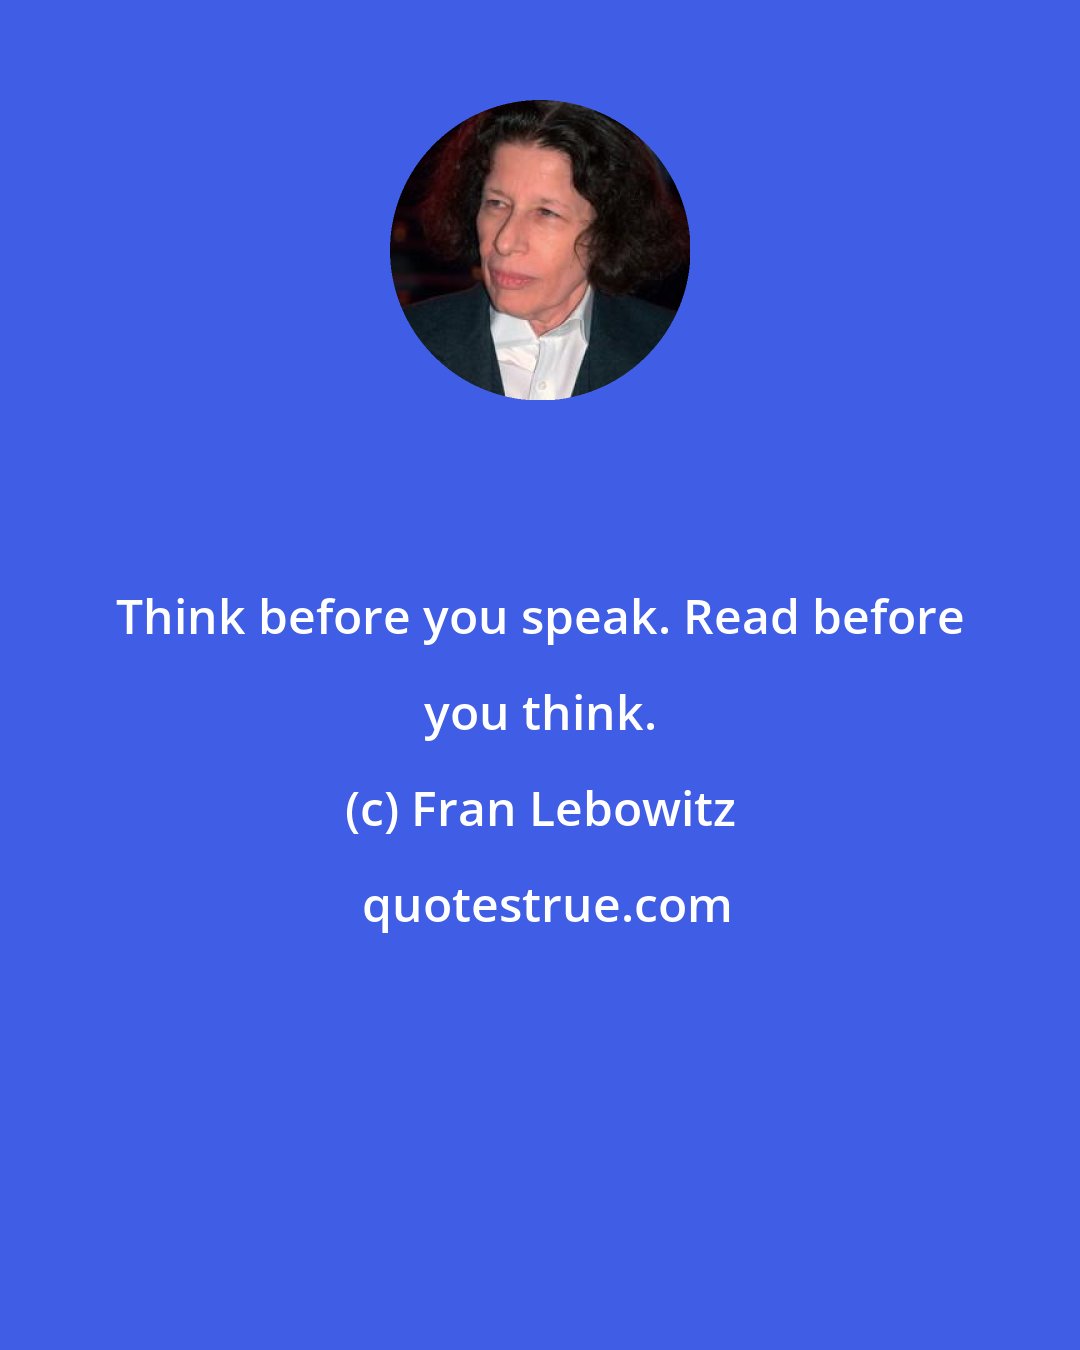 Fran Lebowitz: Think before you speak. Read before you think.